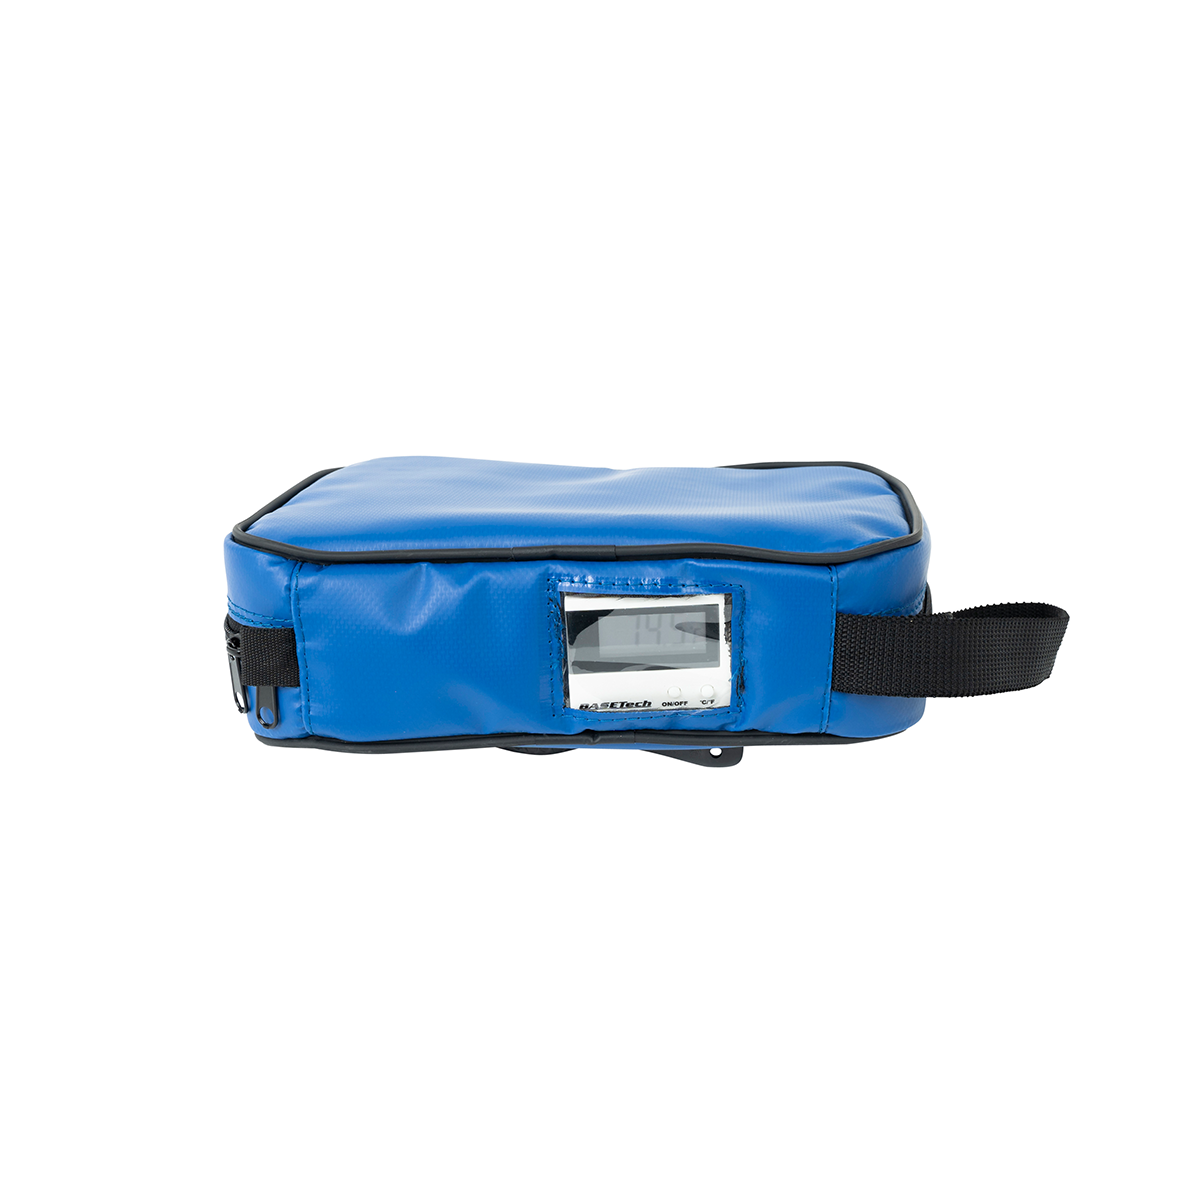 Versapak Medical Pouch with Thermometer on the Side